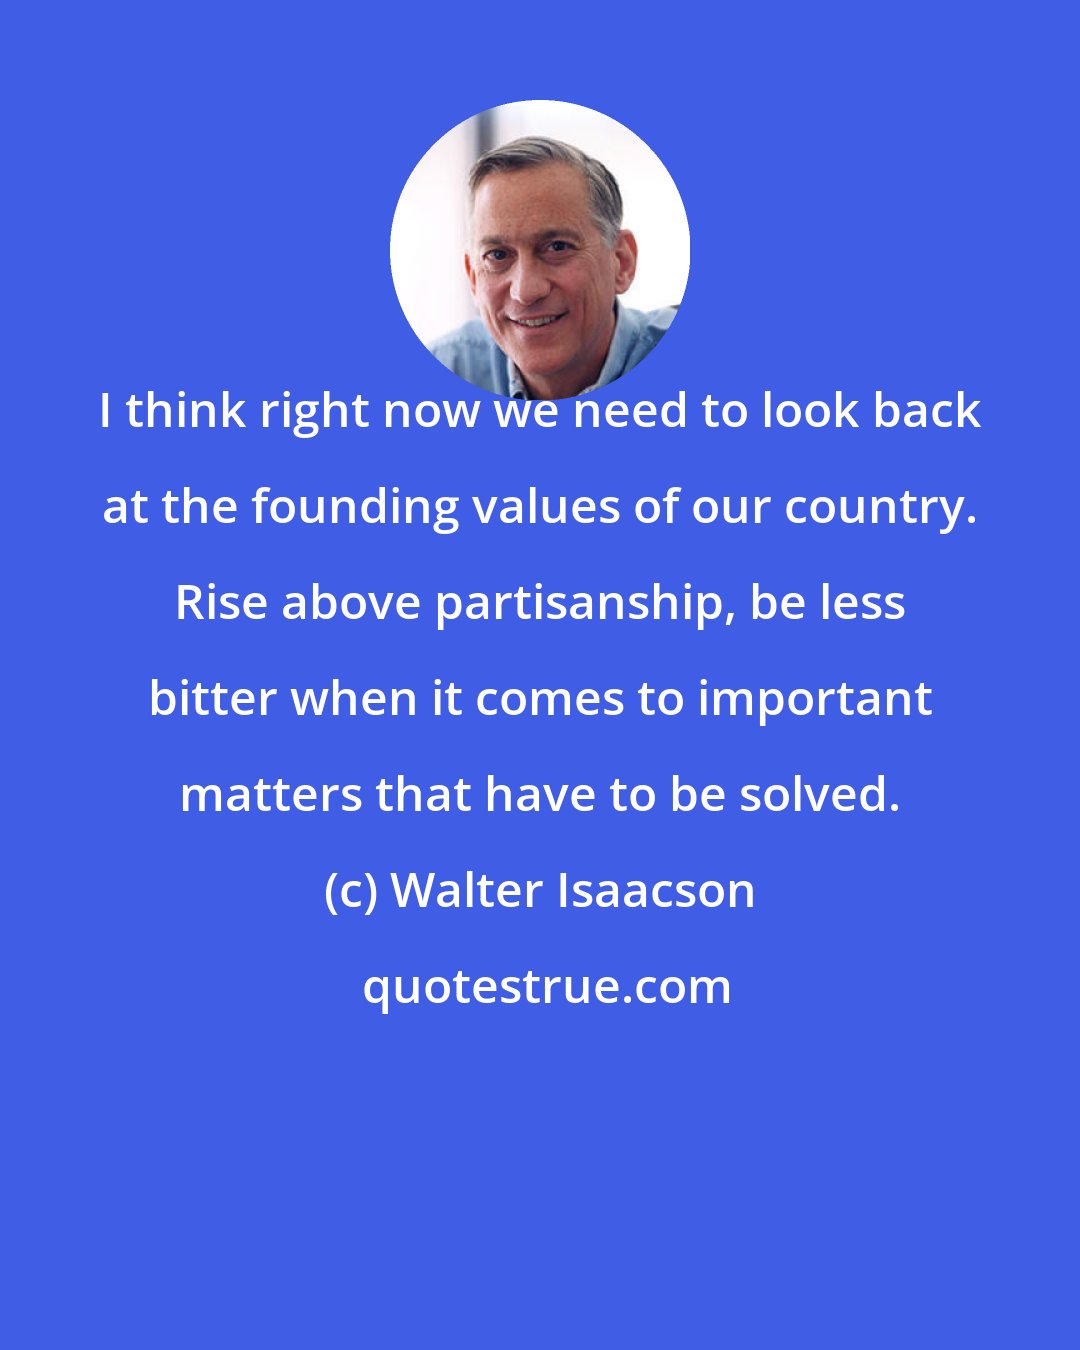 Walter Isaacson: I think right now we need to look back at the founding values of our country. Rise above partisanship, be less bitter when it comes to important matters that have to be solved.